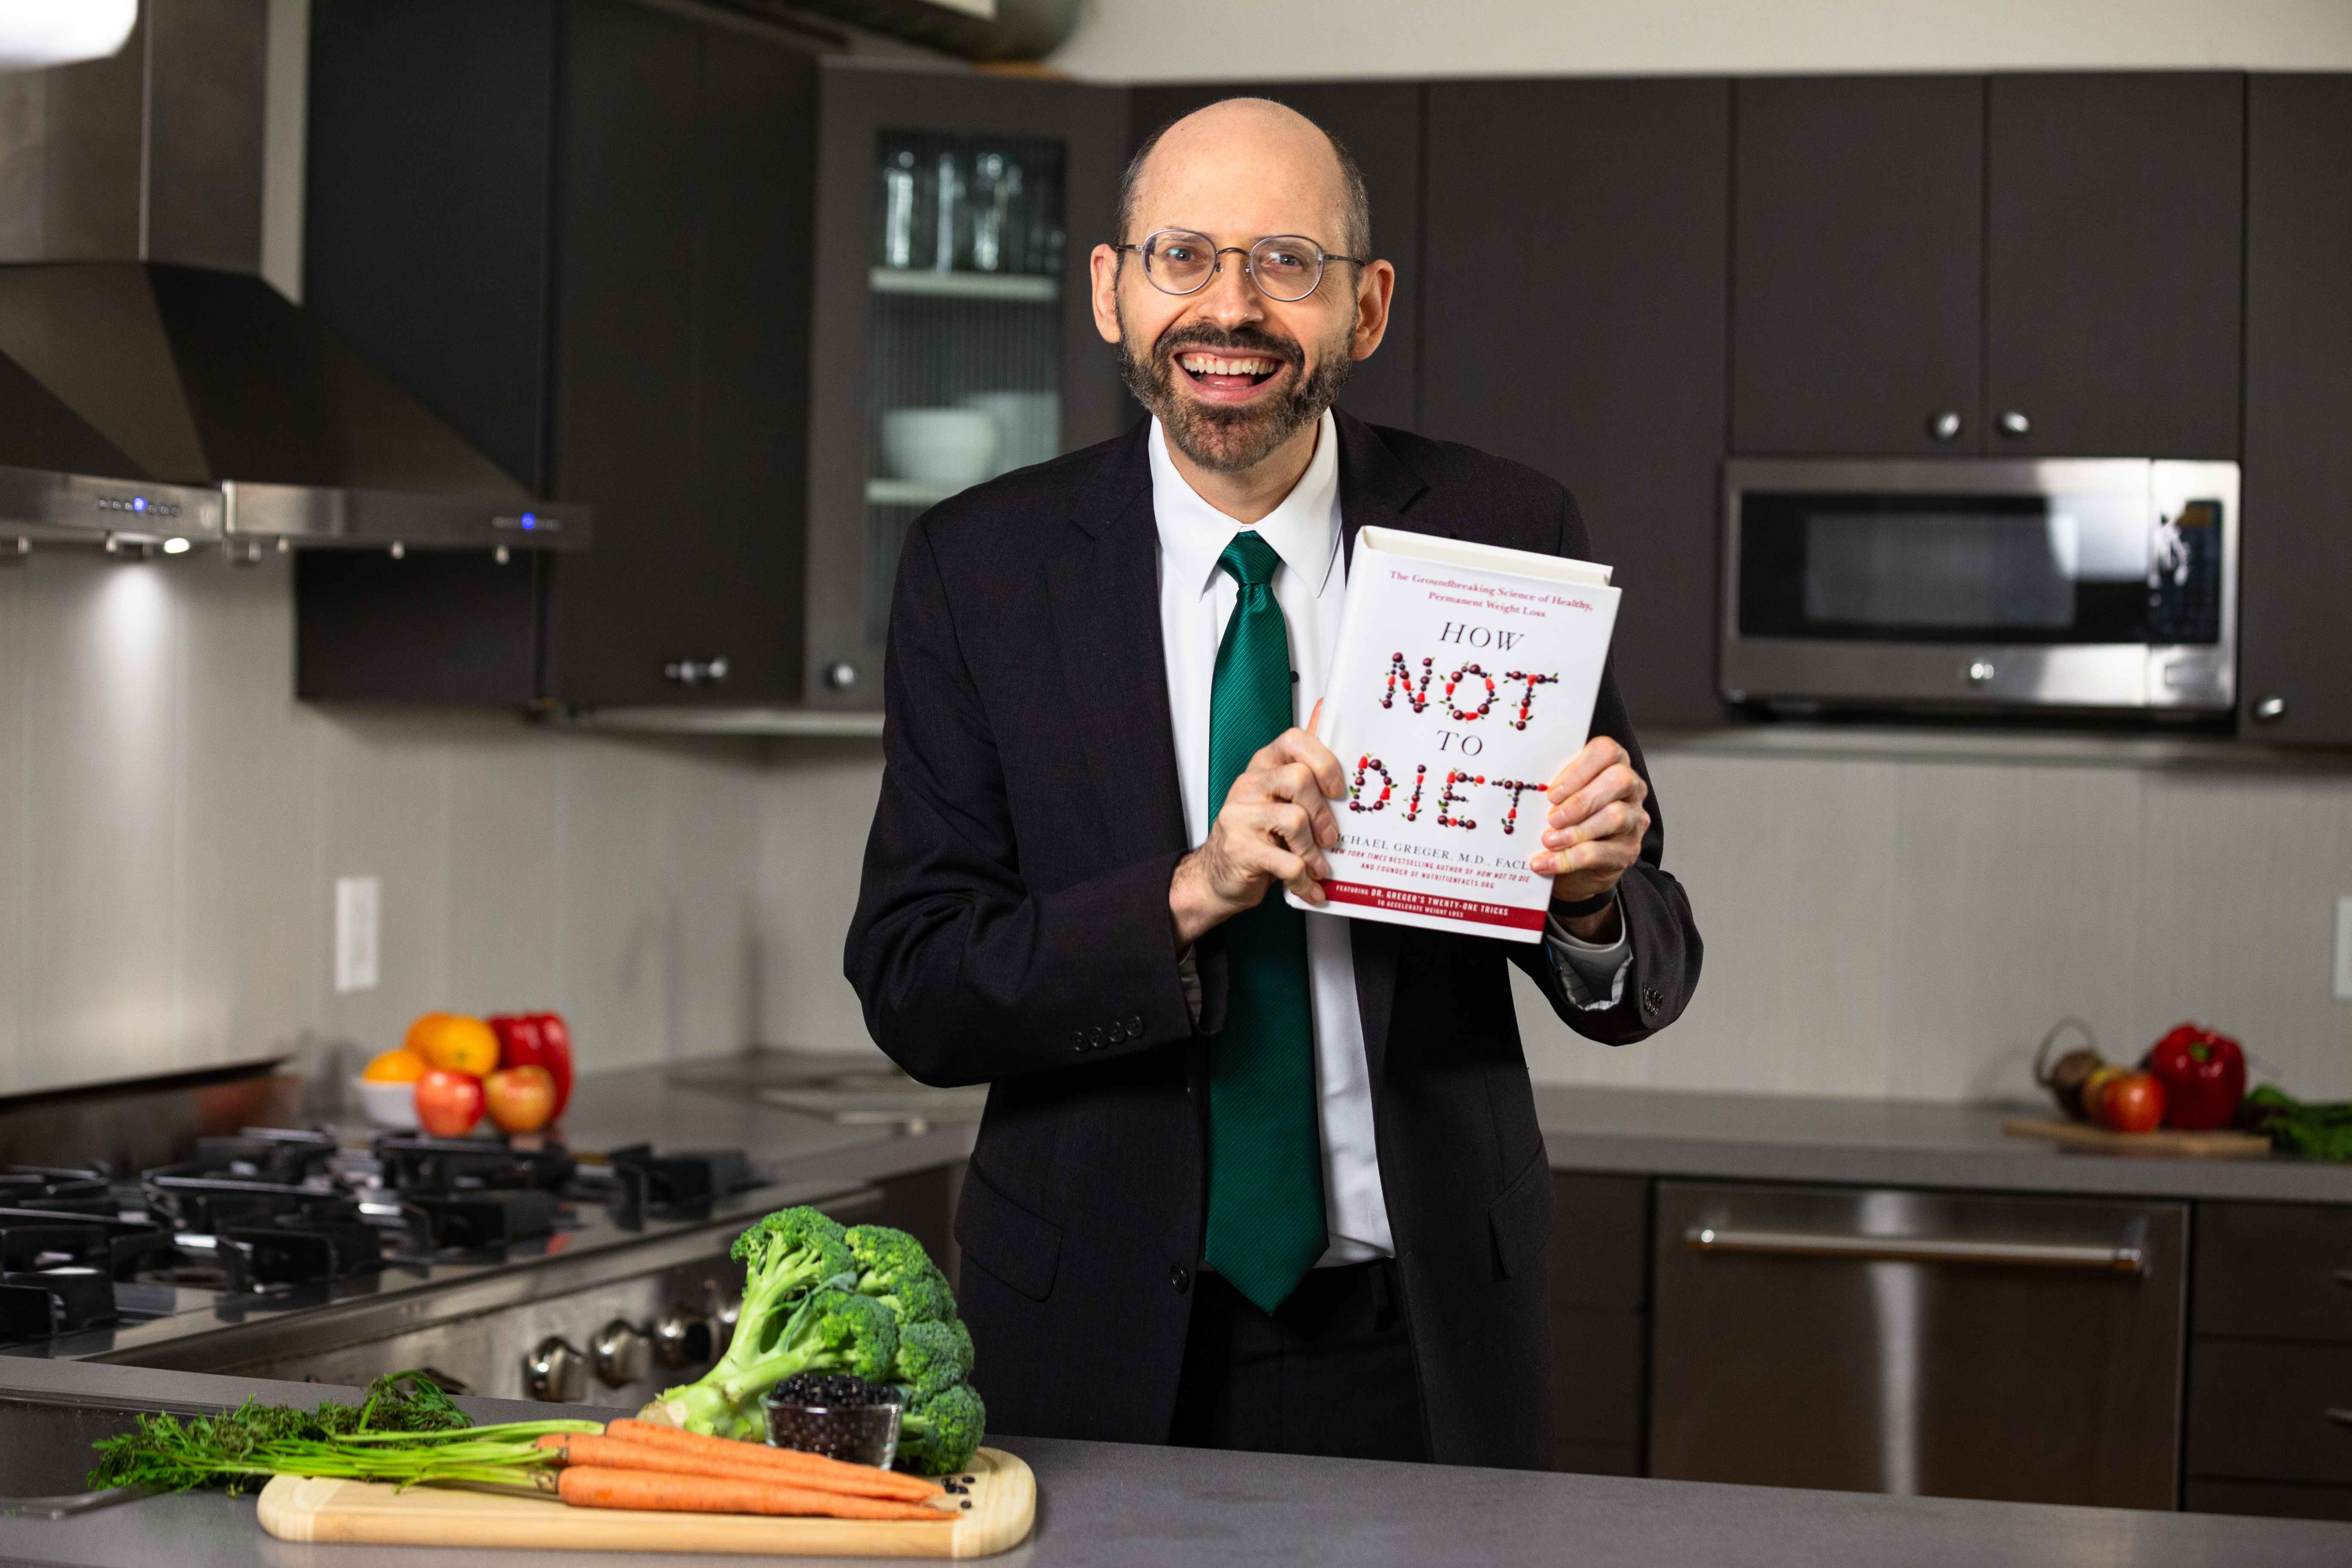 Dr. Greger Holding How Not to Diet